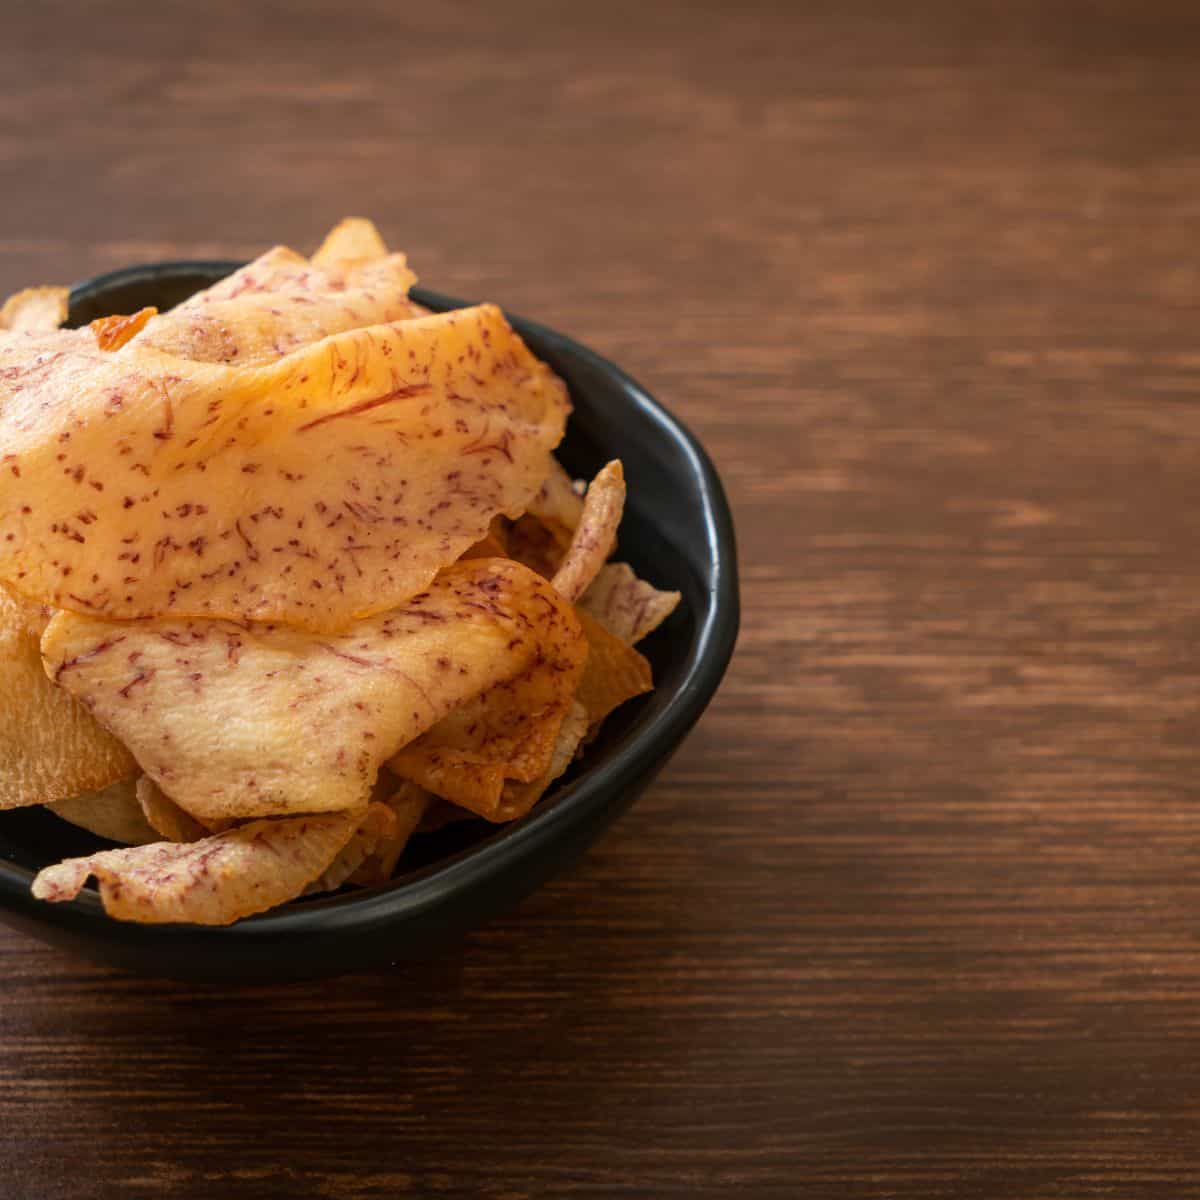 Taro root chips in a black bowl.